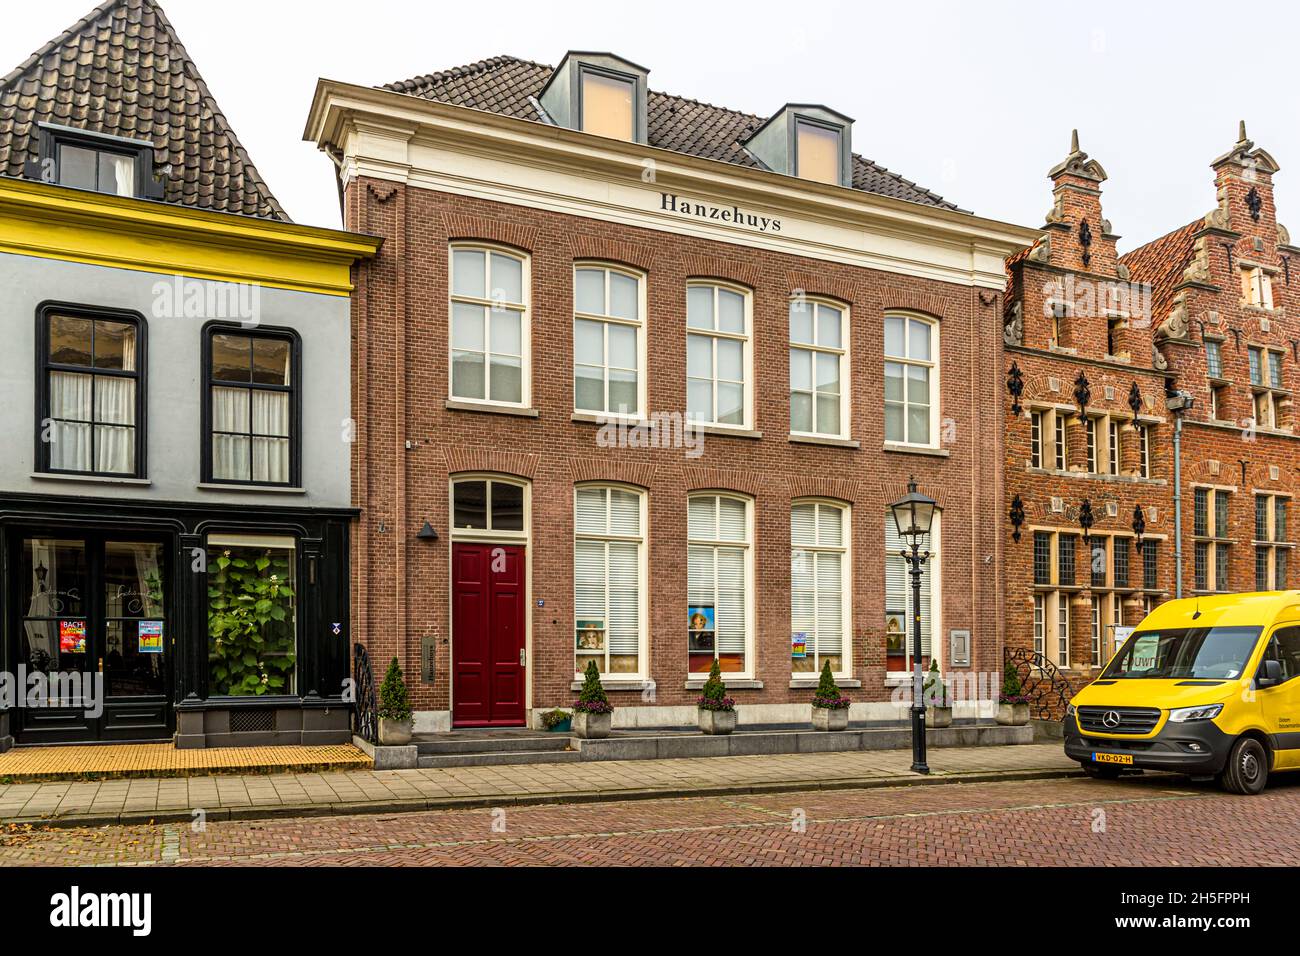 Hanzehuys. The house of the Hanseatic League in Doesburg, Netherlands Stock Photo